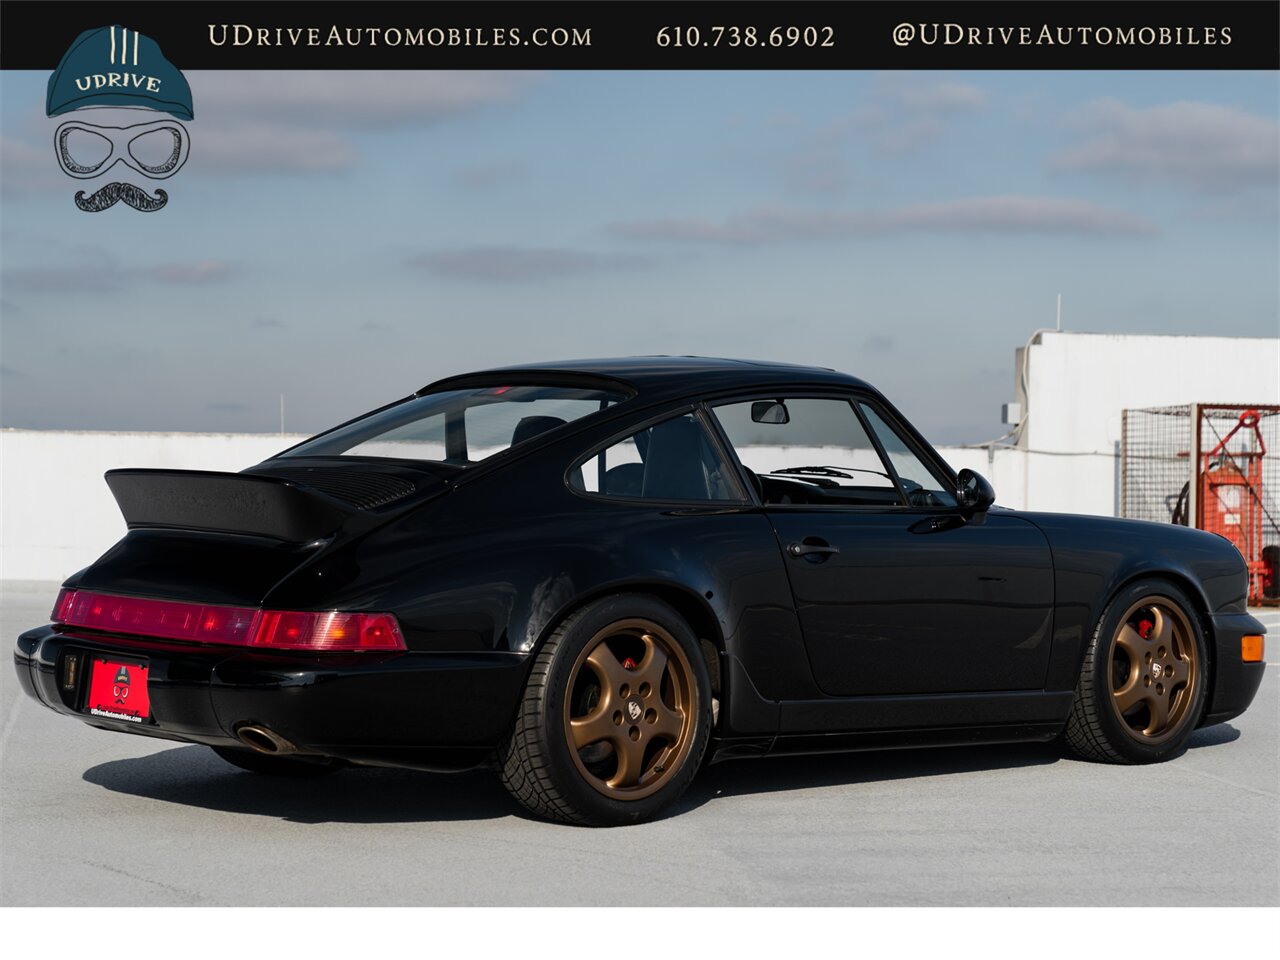 1989 Porsche 911 C4  964 Carrera 4 C4 5 Speed Manual $33k in Recent Service History - Photo 20 - West Chester, PA 19382